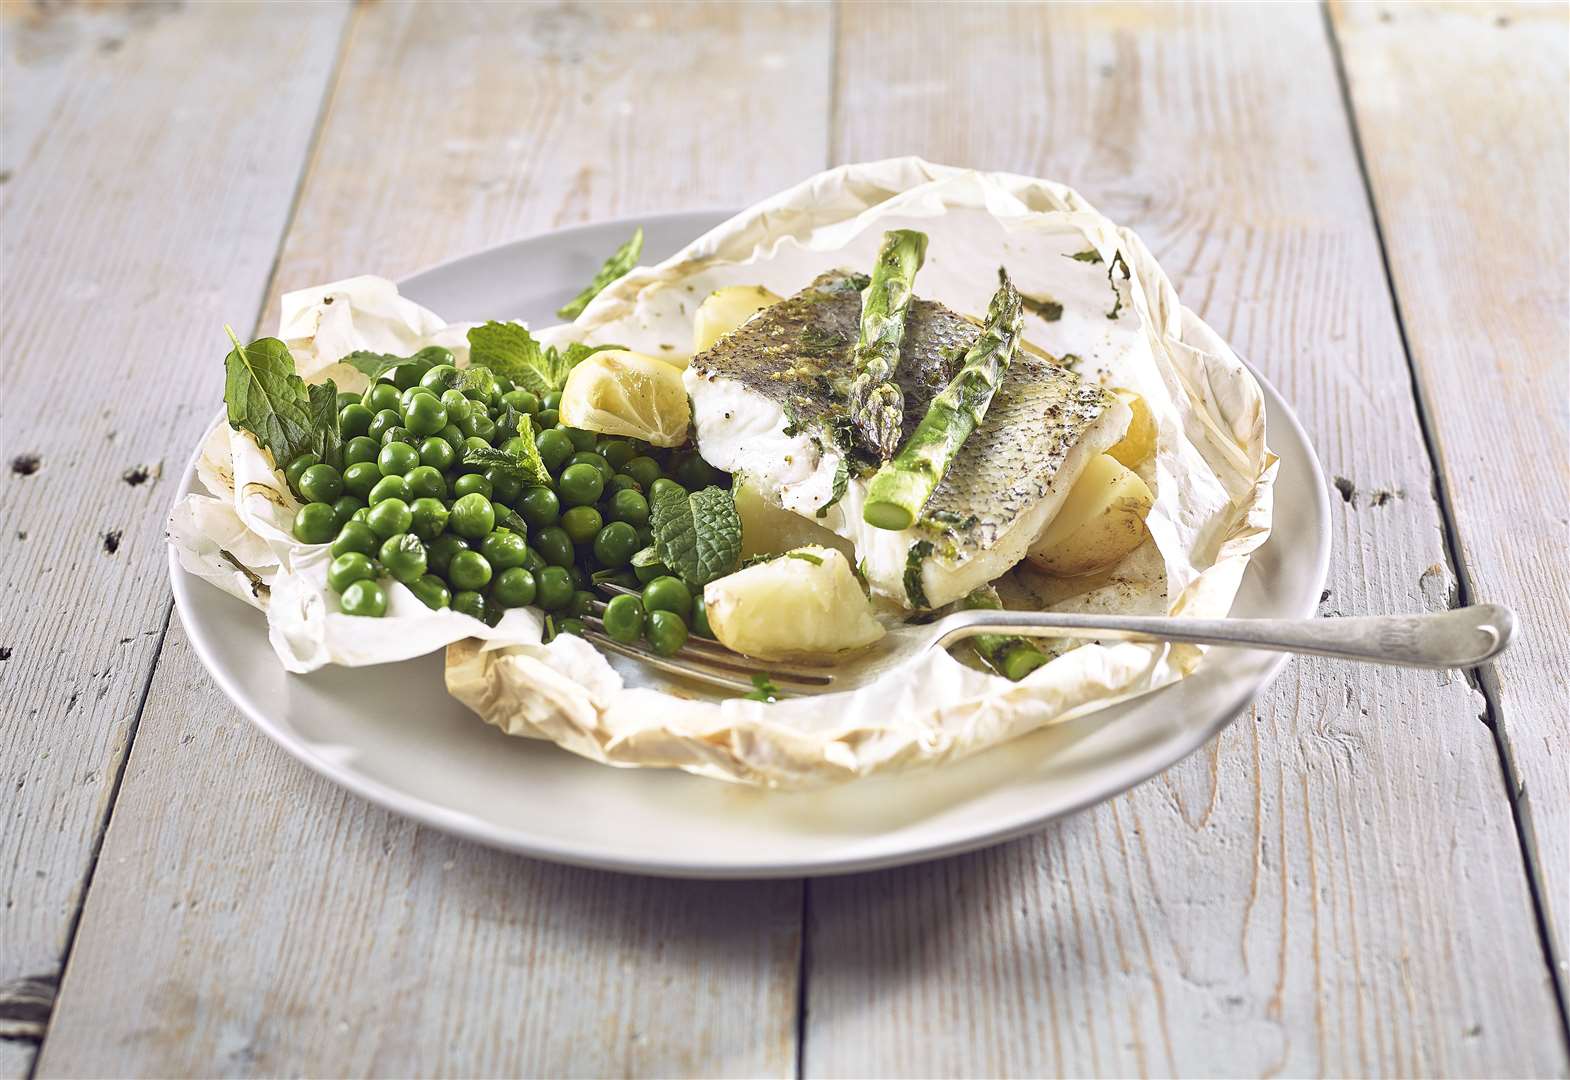 TASTY TREAT: Opt for fish caught in UK waters